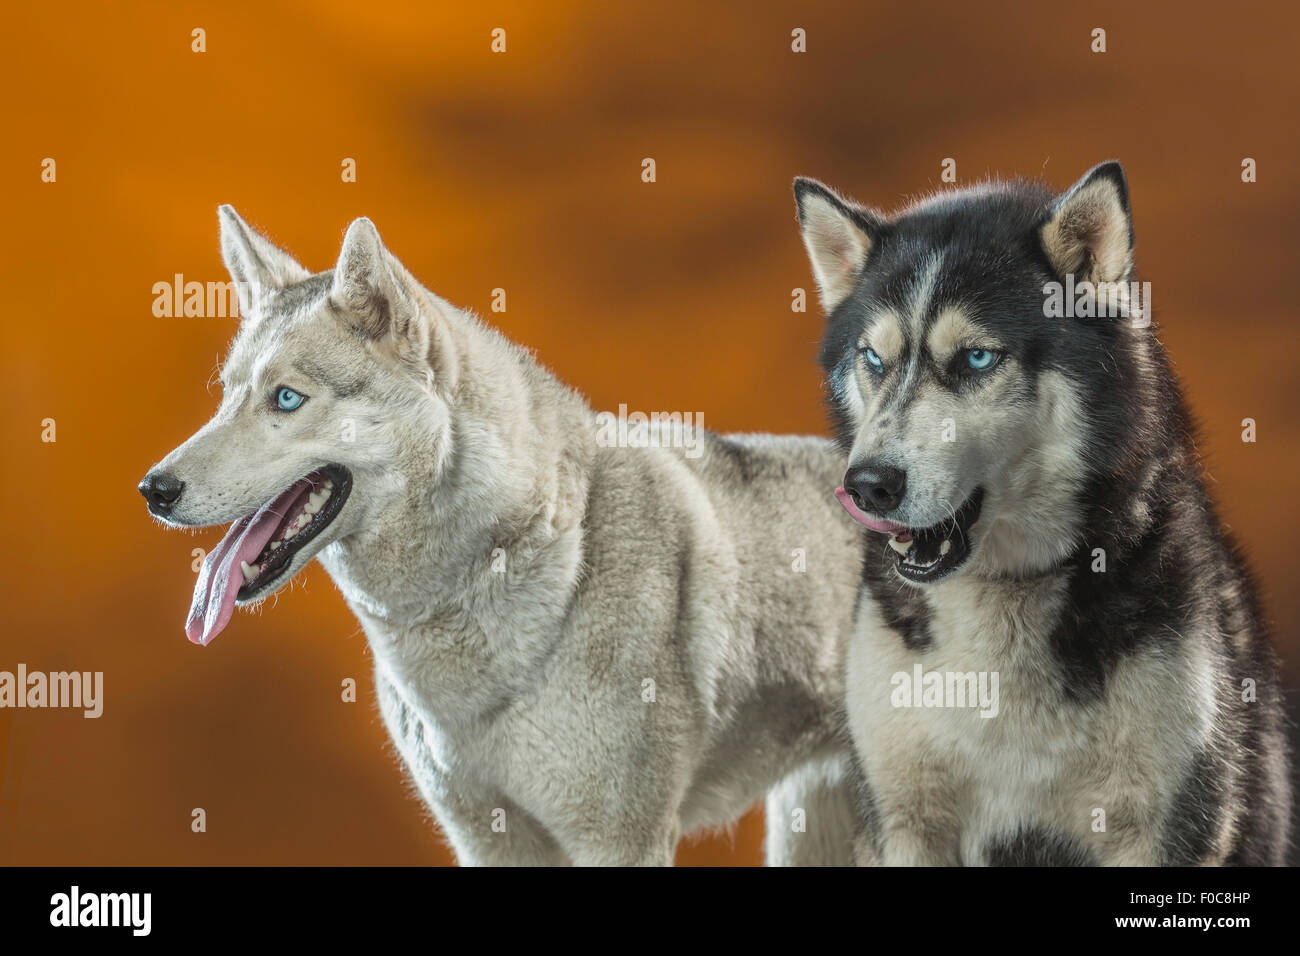 Siberian Huskies over colored background Stock Photo